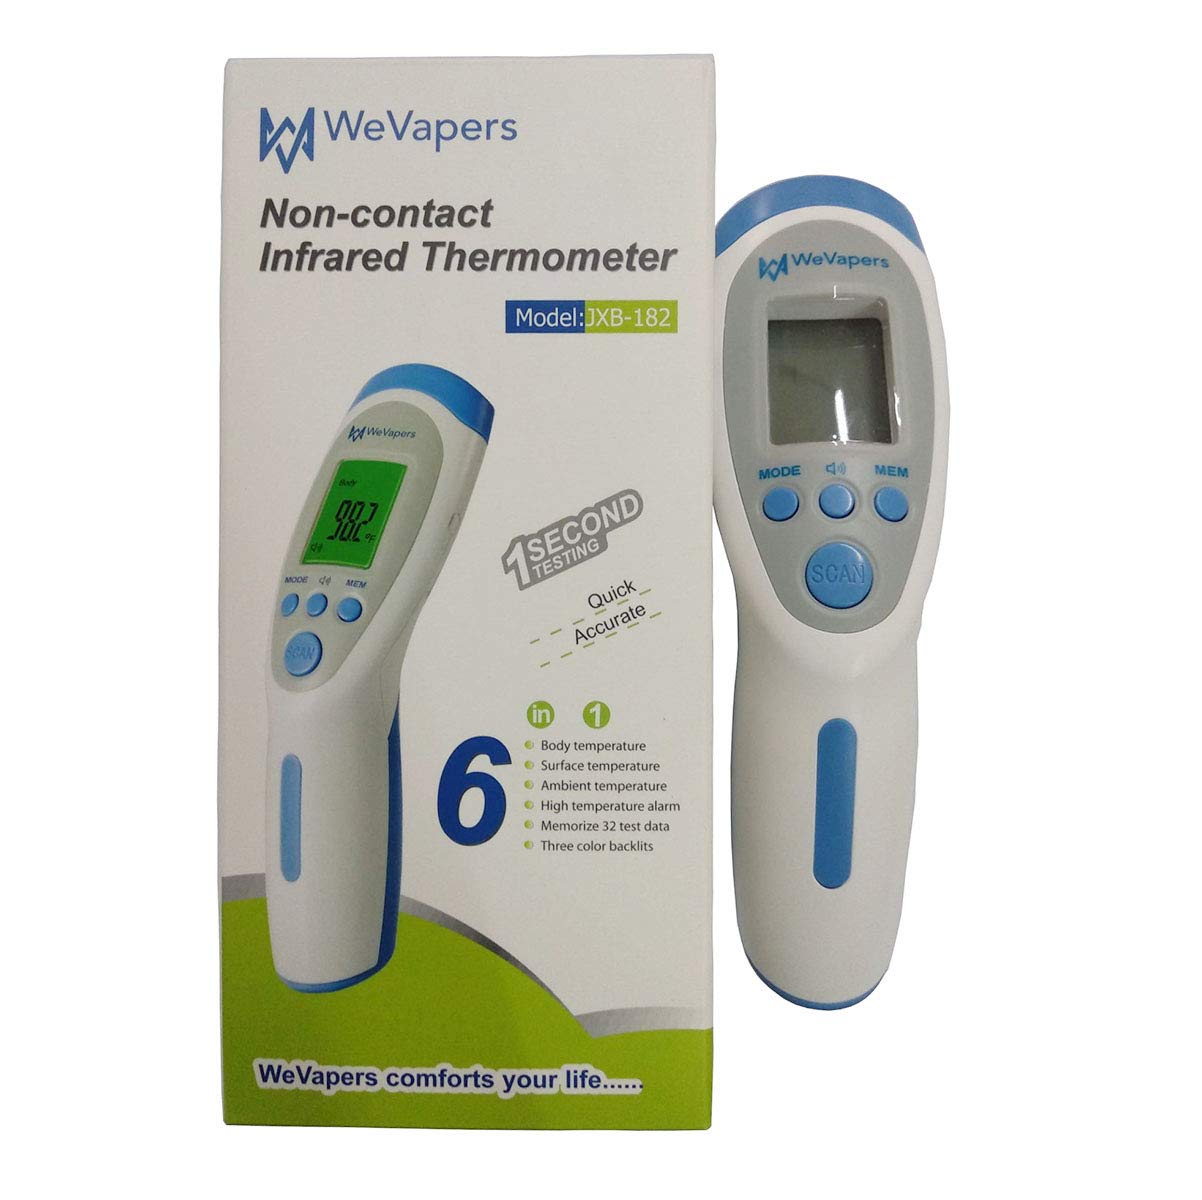 Forehead/Body Thermometer “WeVapers”